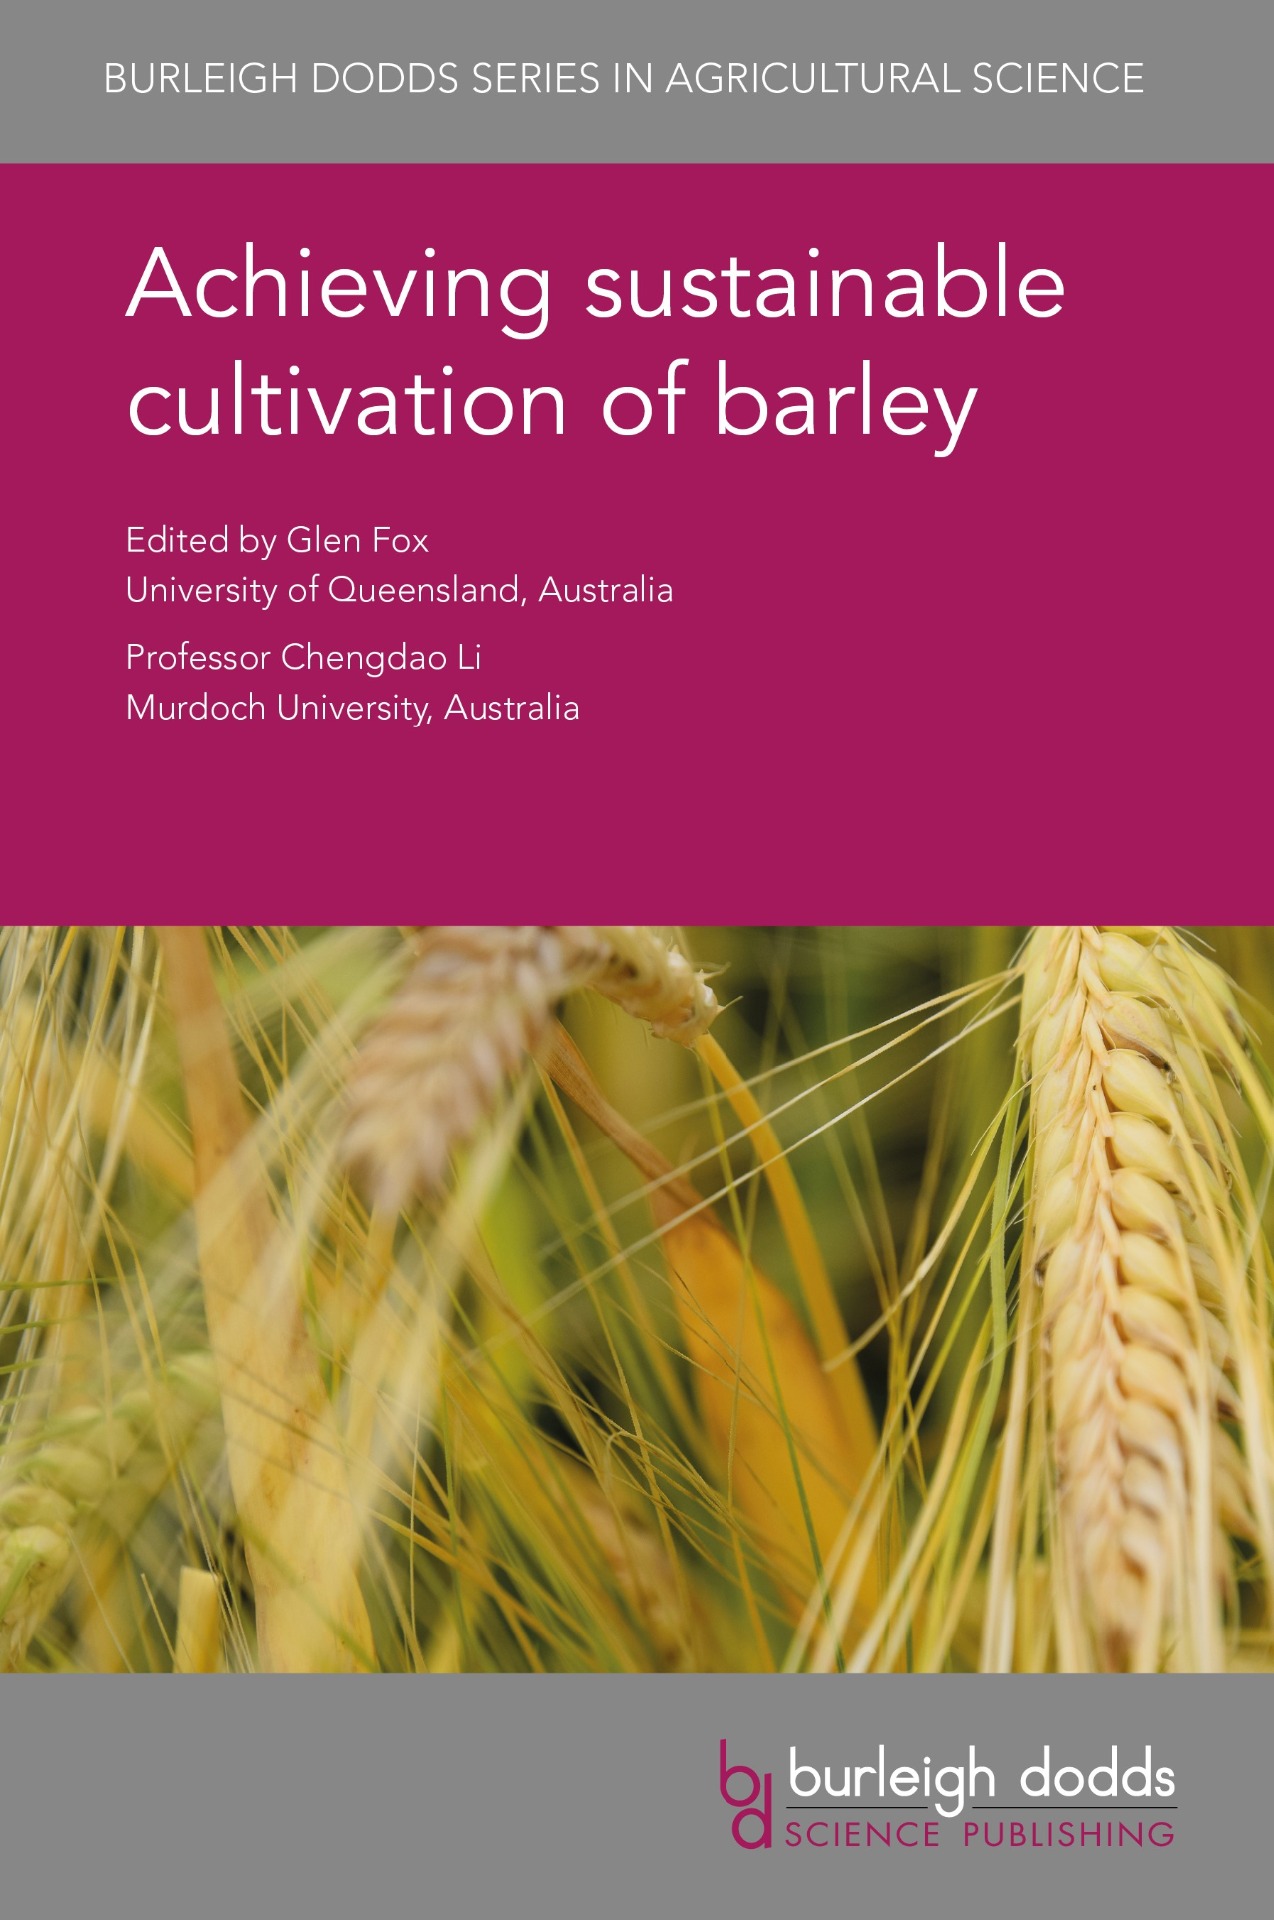 Achieving sustainable cultivation of barley